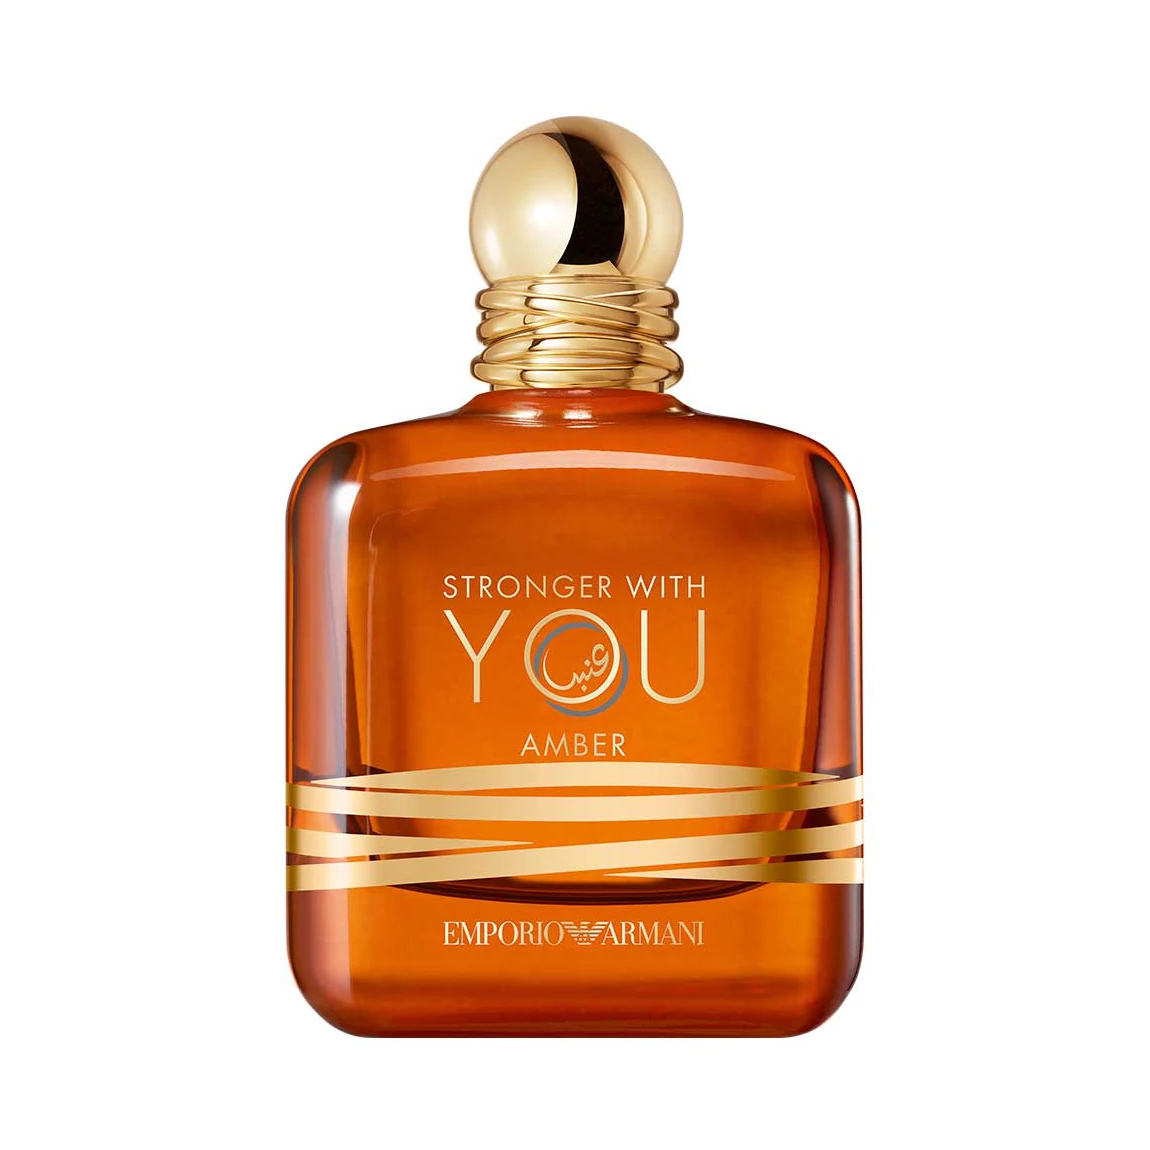 Emporio Armani Stronger With You EDT - A Stand out Fragrance